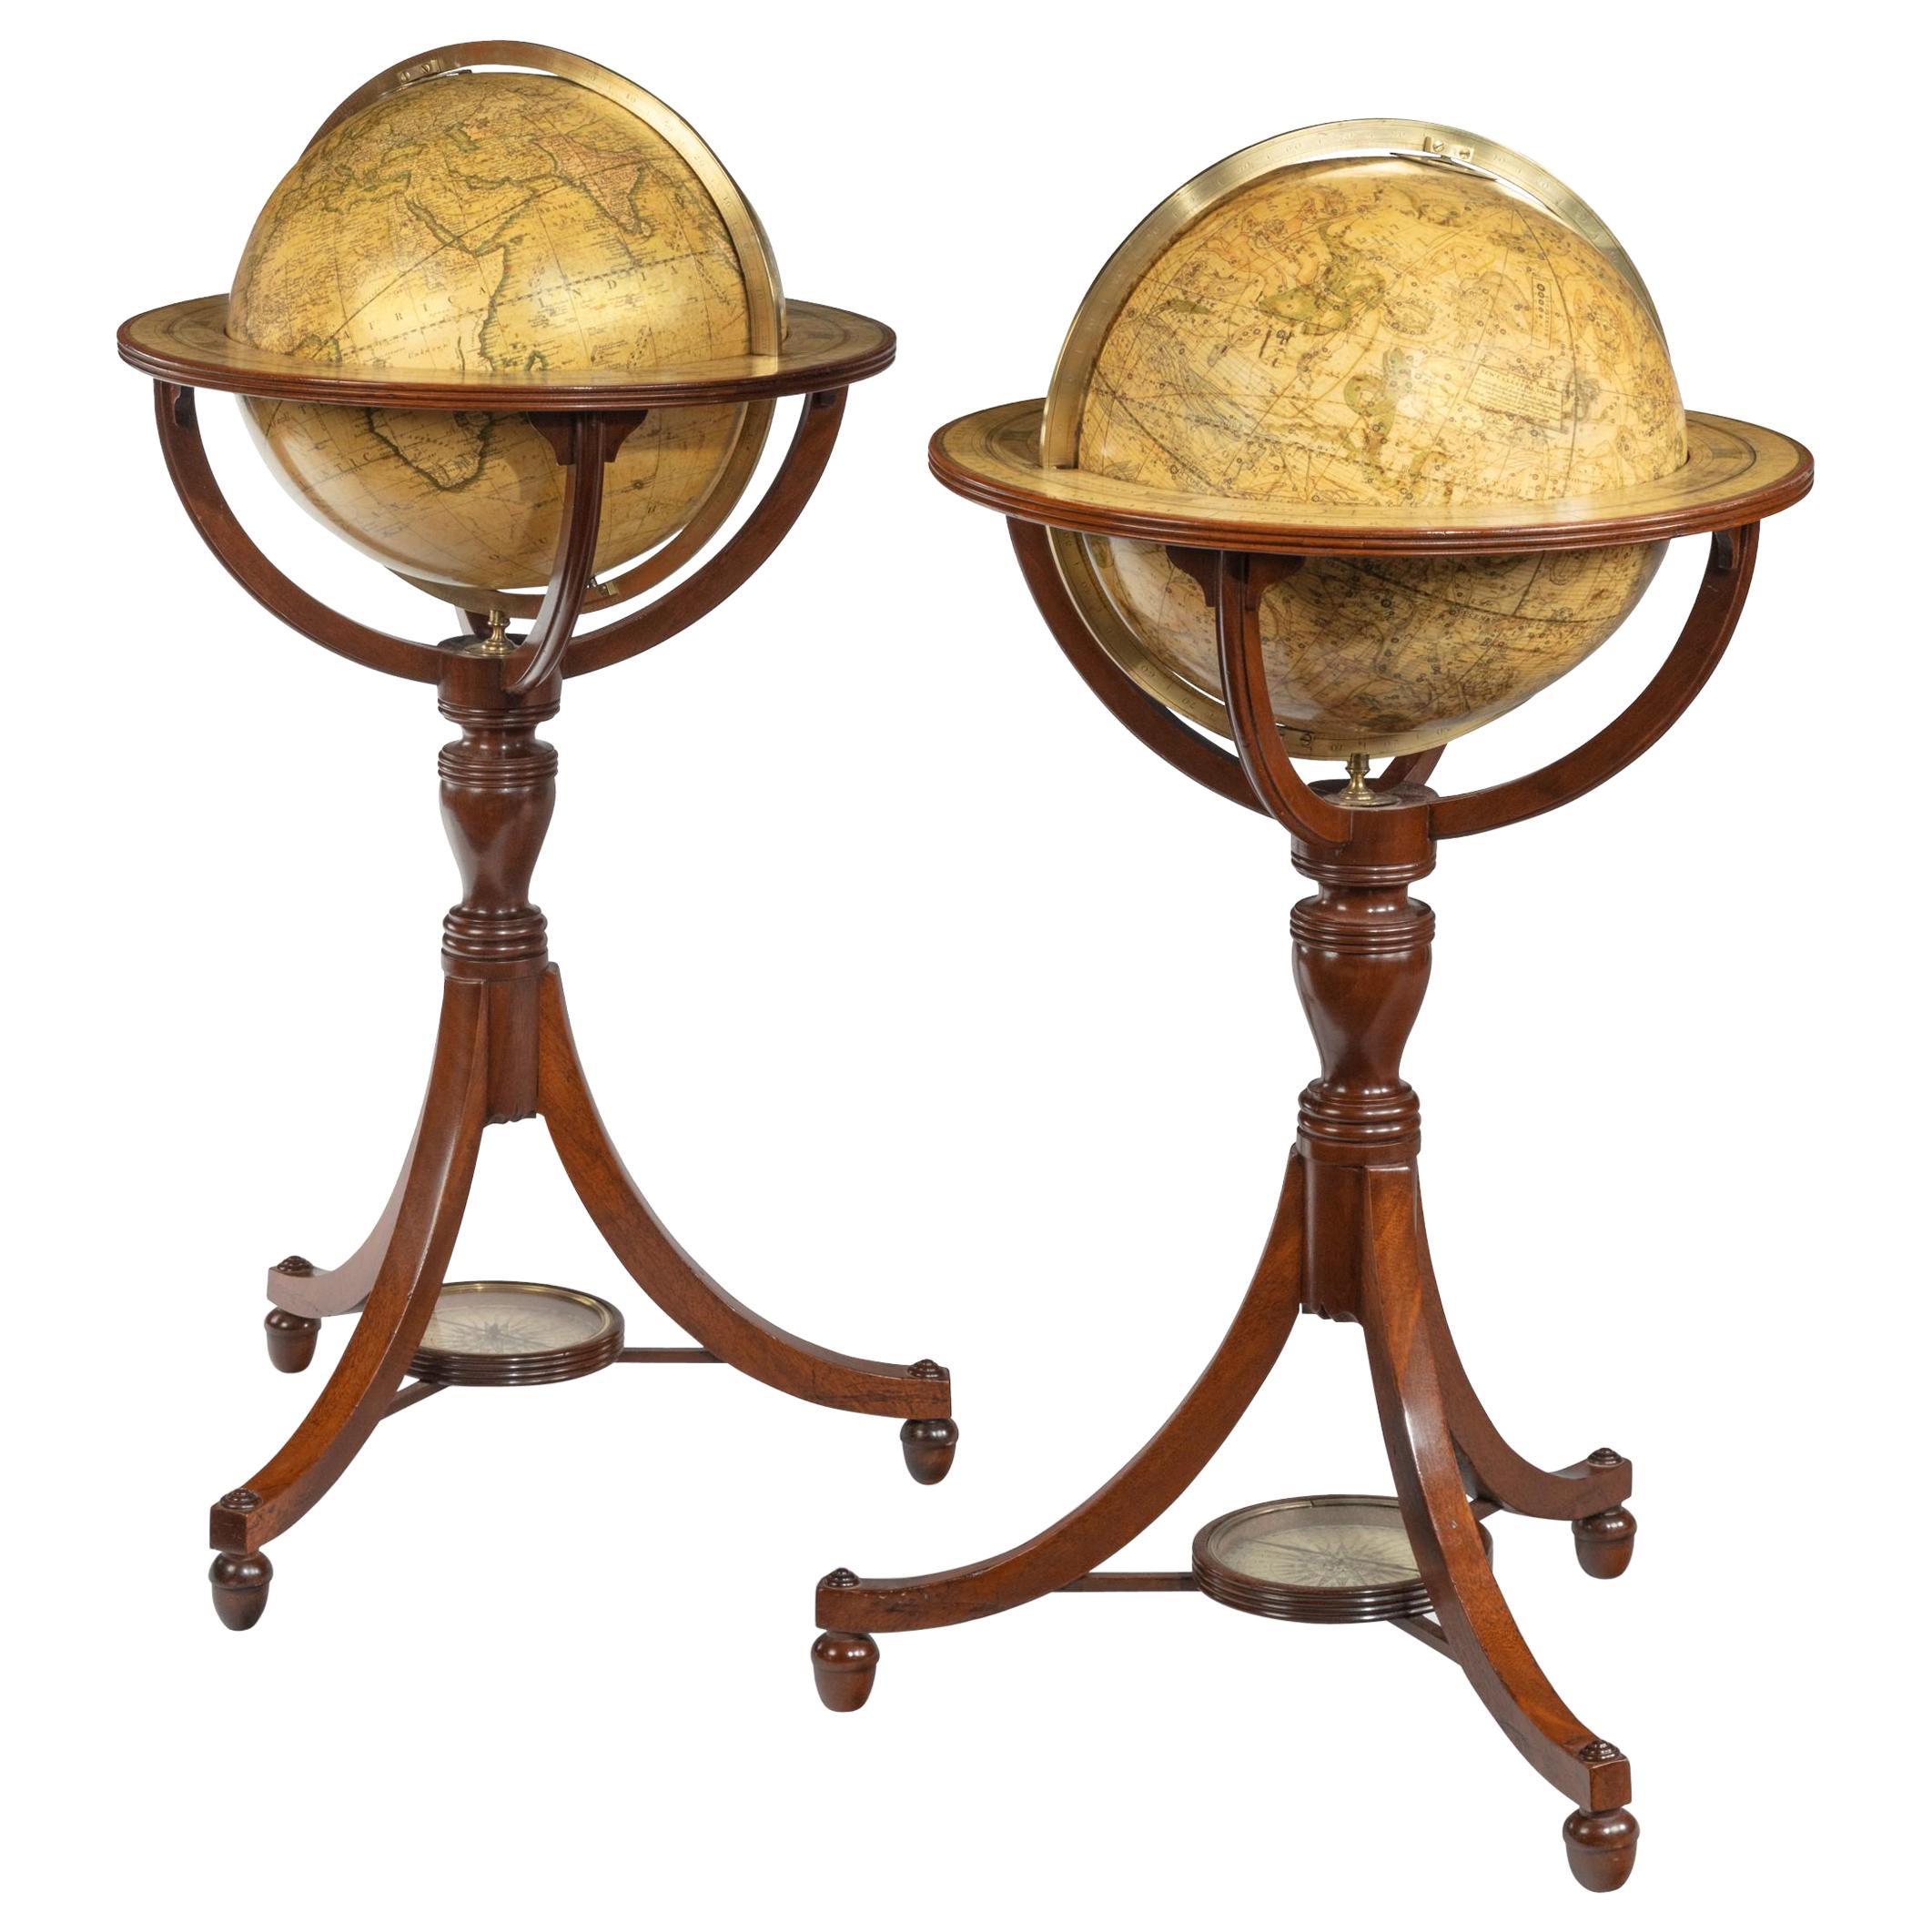 Pair of Floor Globes by Cary